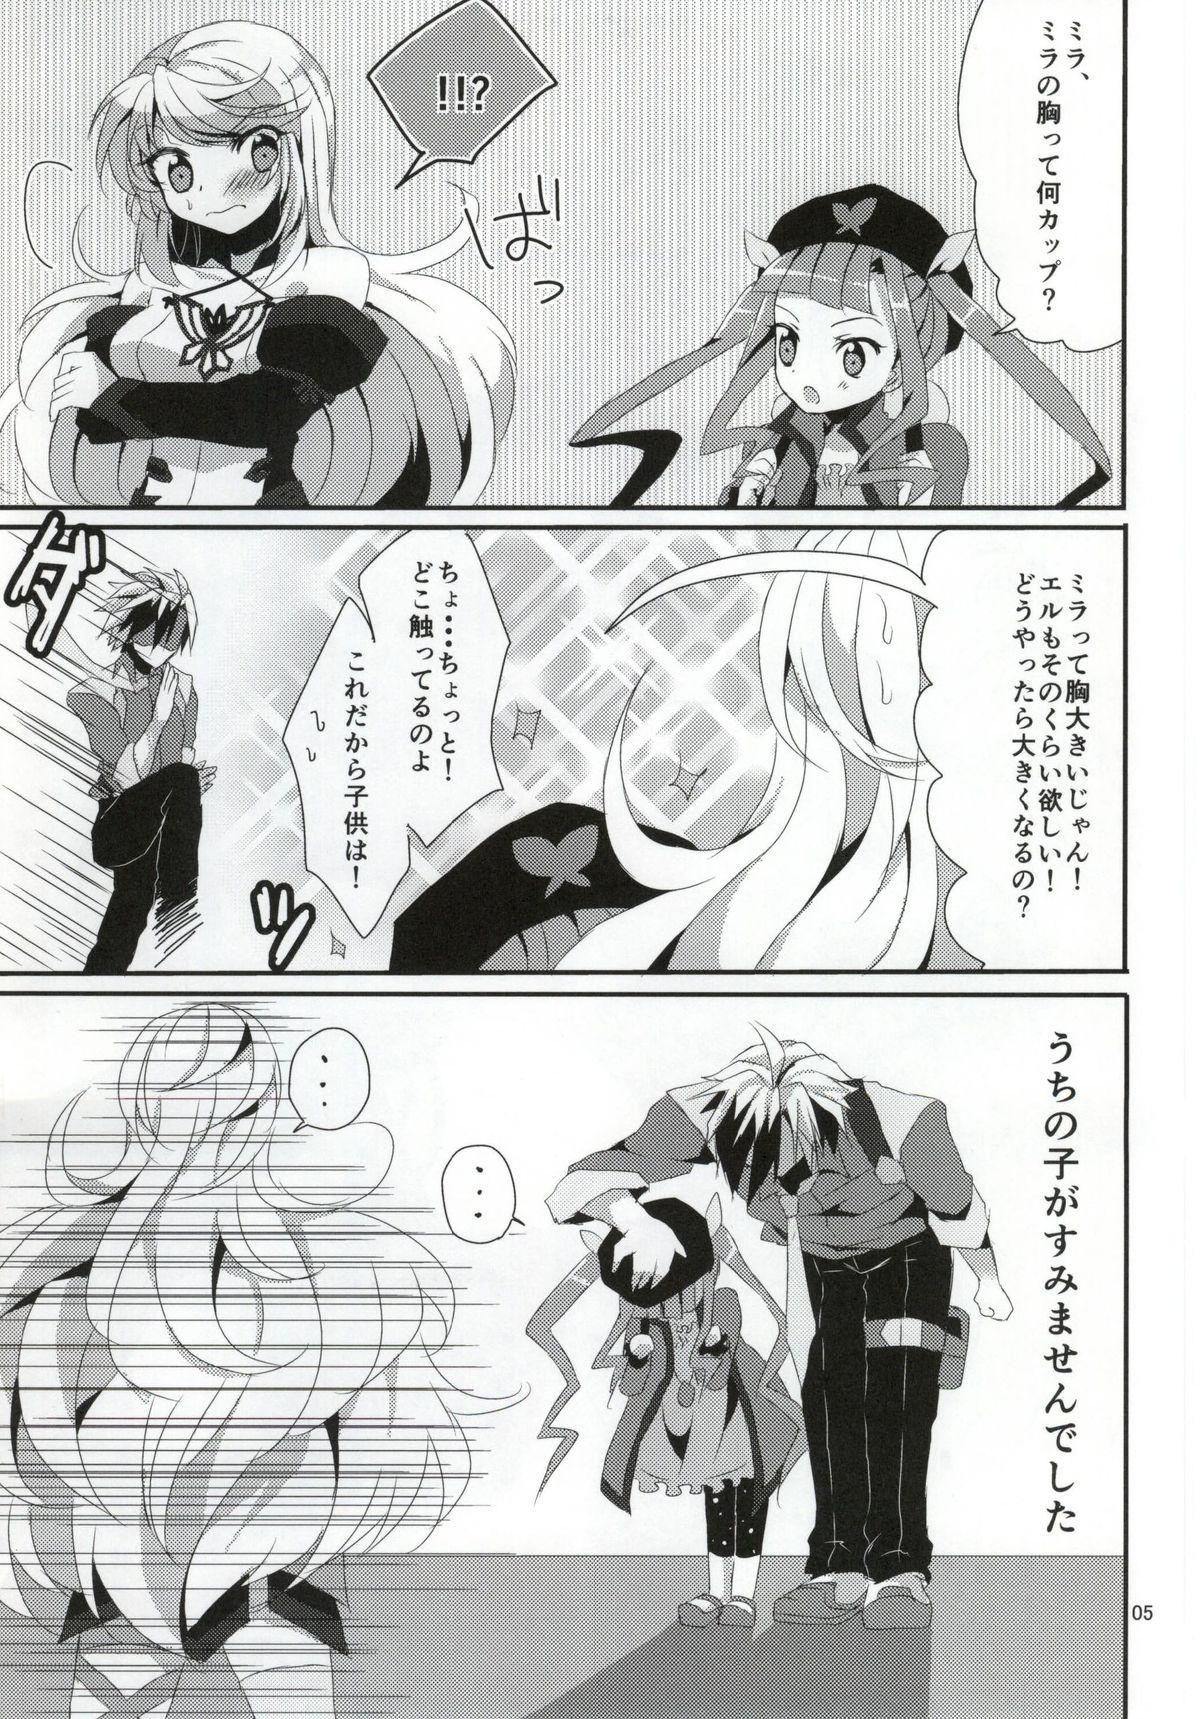 Rough Sex LudMilla Sweet Diary - Tales of xillia Unshaved - Page 4